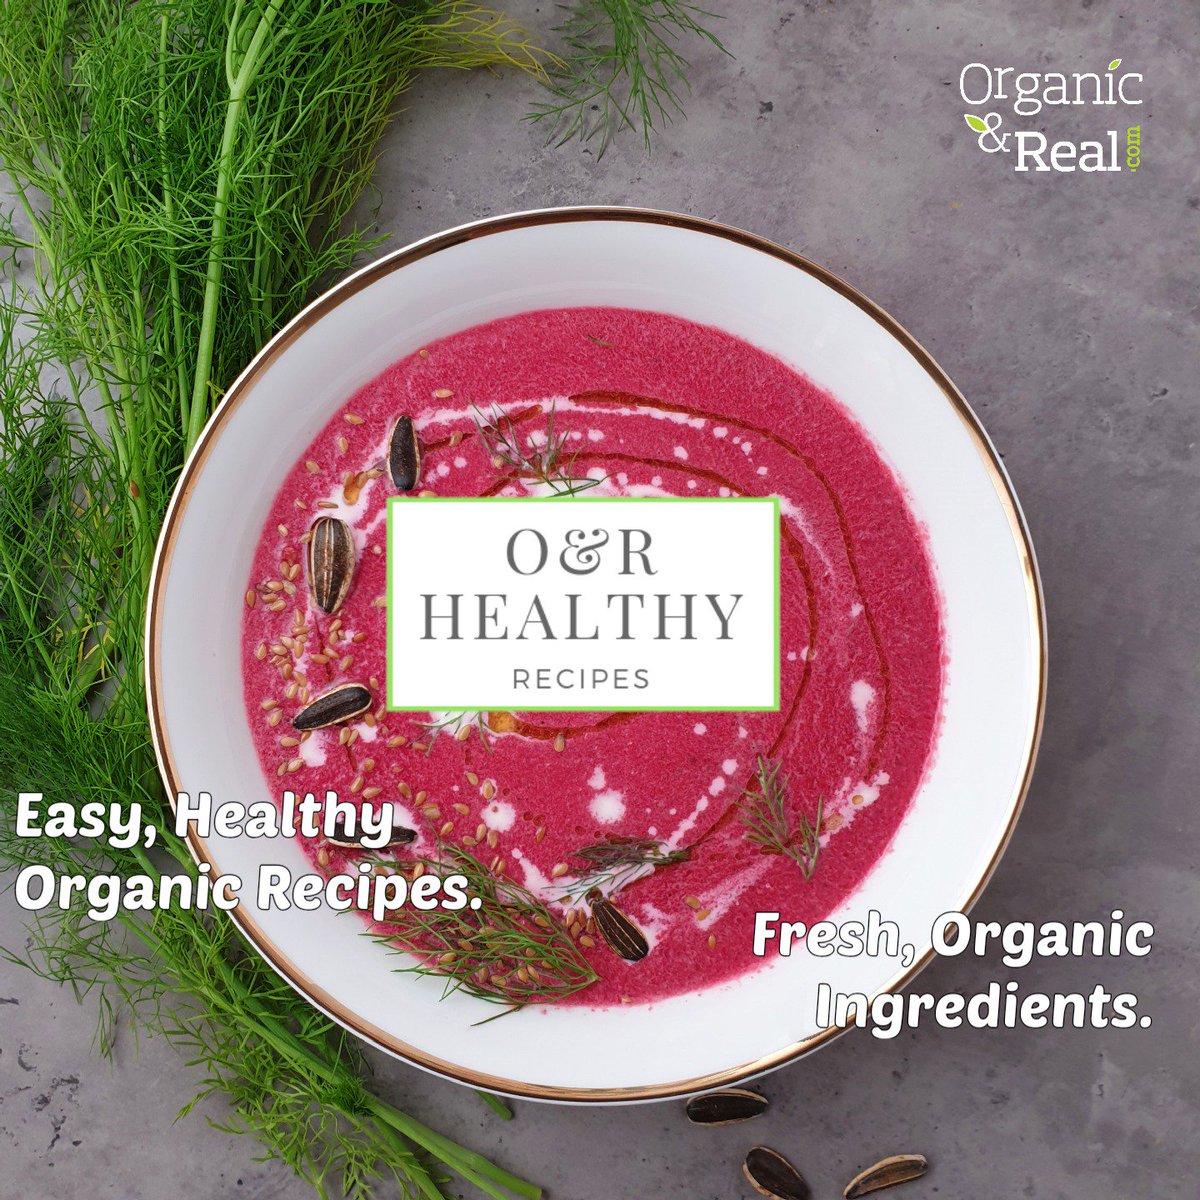 Time for some warm and comforting broth with our special Beetroot Ginger Soup. Try out our recipe guide and tell us how it was!
bit.ly/2CdroVl
#O&Rrecipes #healthyrecipes #backtohealthy #eatright #naturaleating #nutritiouseating #buyonline #ecommerce #Organicandreal